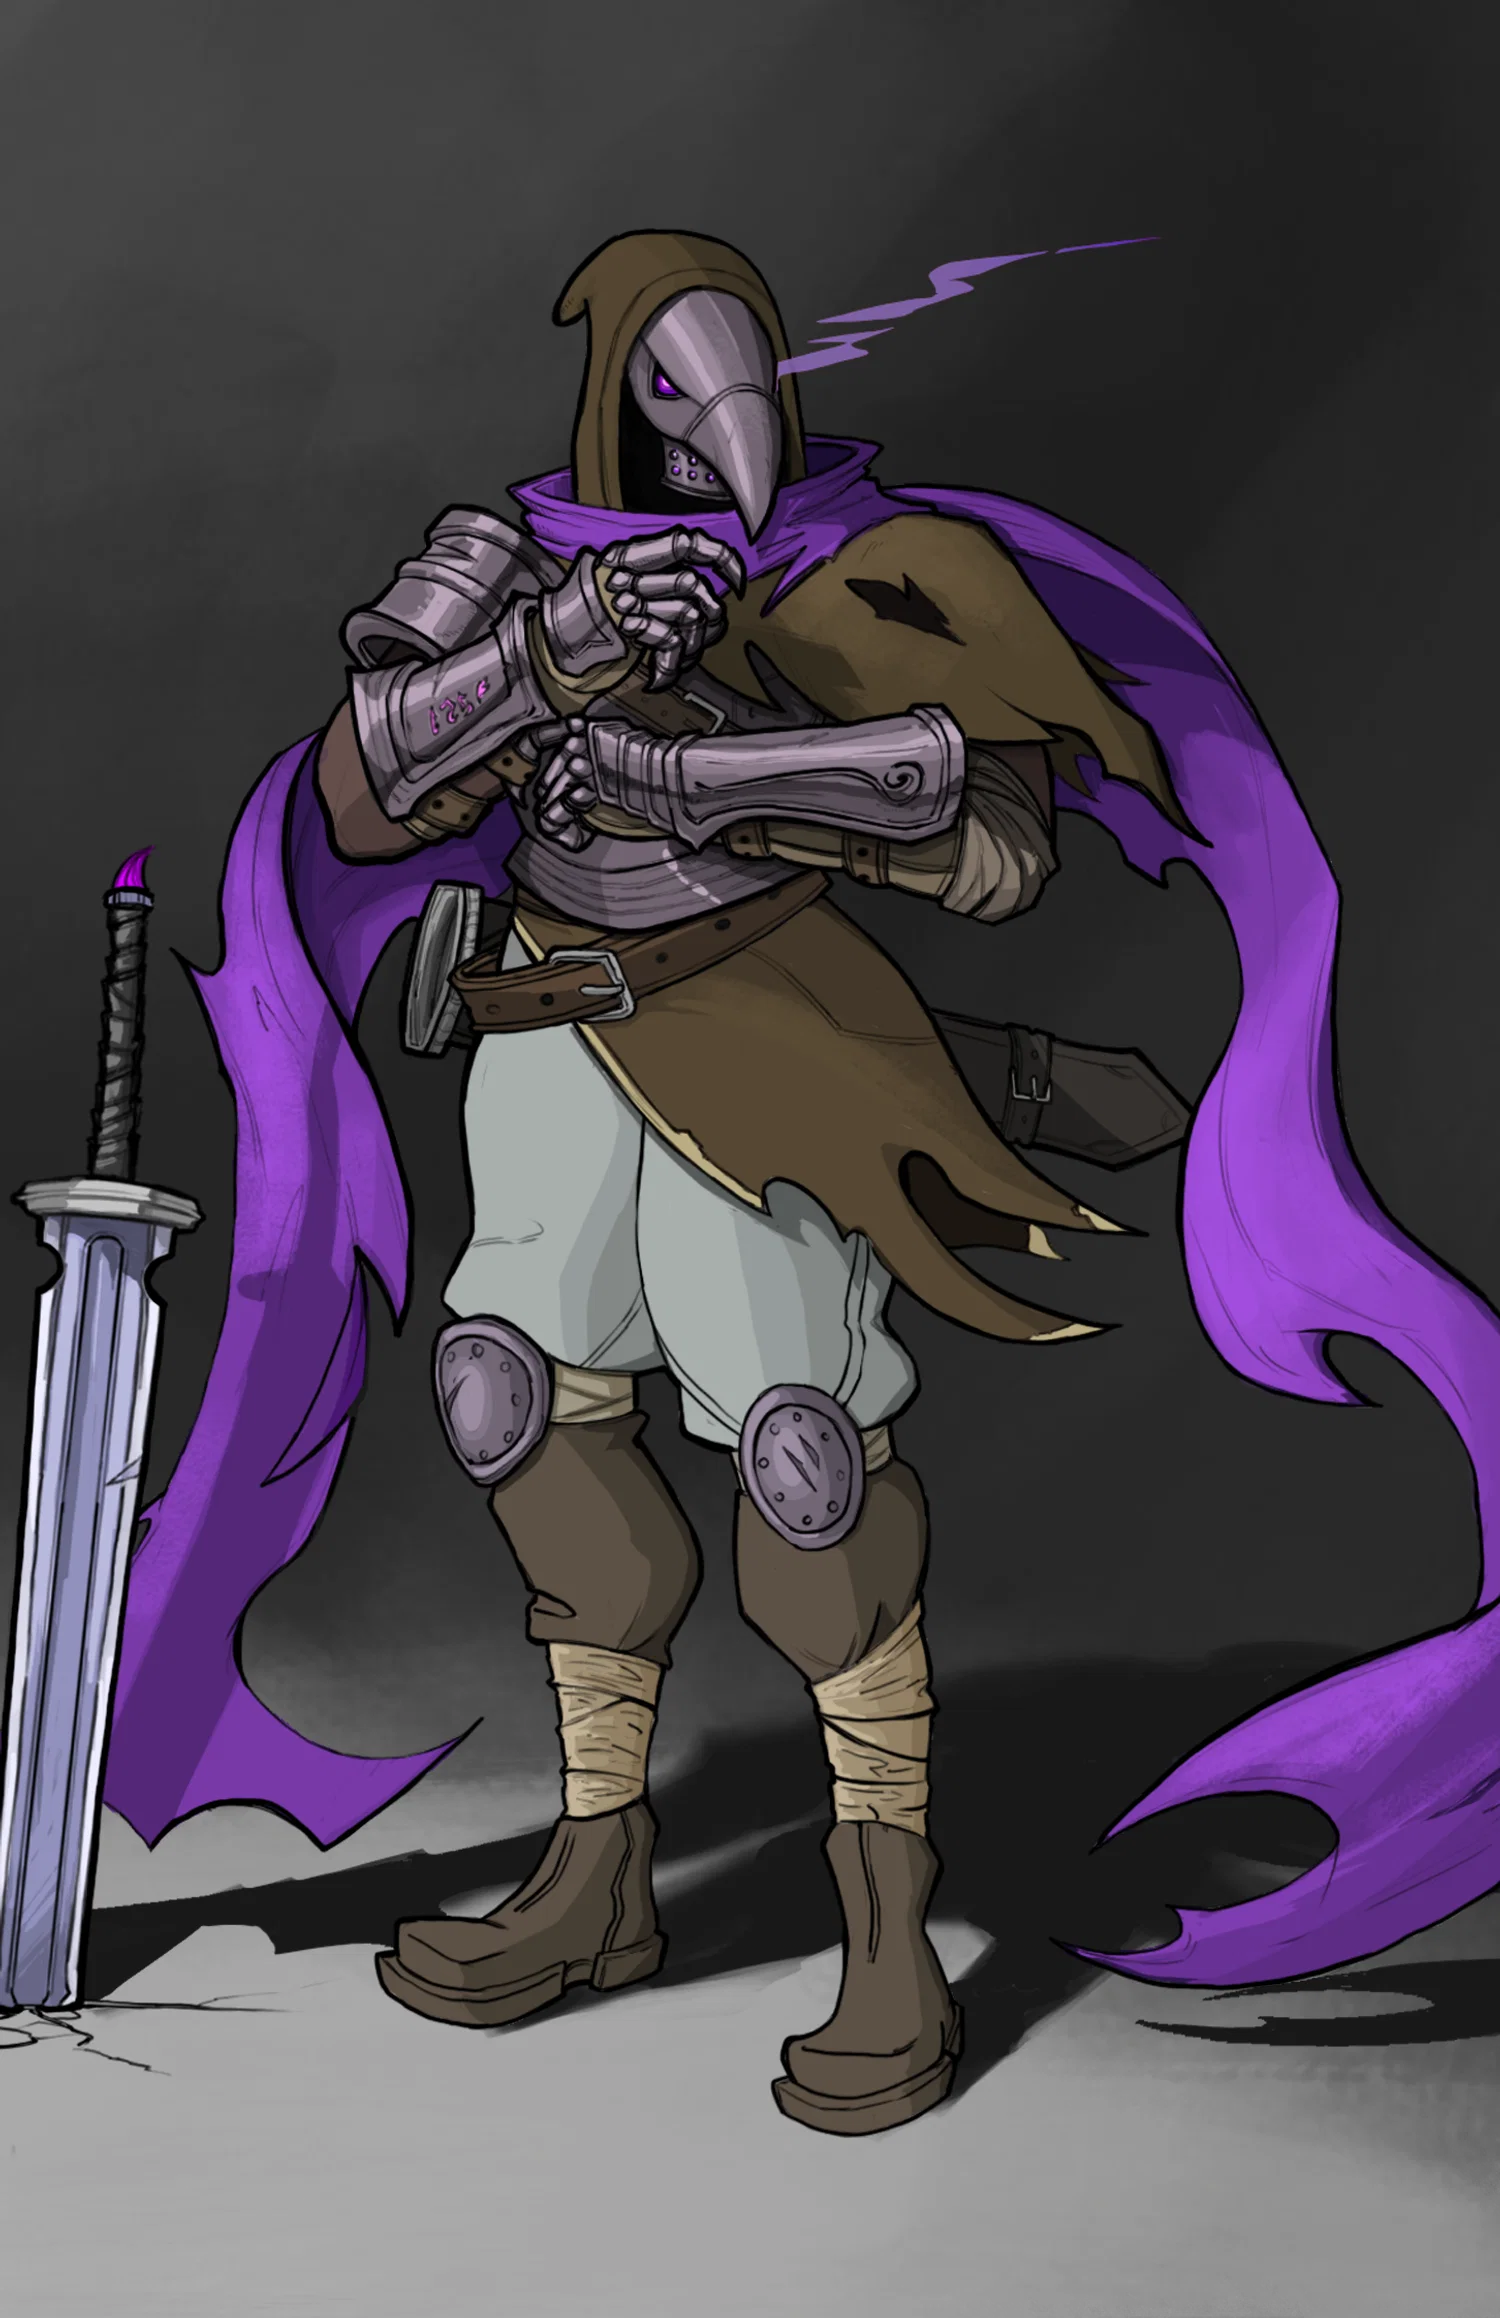 Raven, the Rogue, is an Ascendant Lord that does not hail from any region. He is a cynical individual, believing that mankind is not above their nature to abandon each other in order to safeguard their own futures. Despite his views, this does not stop from eliminating threats of his world.